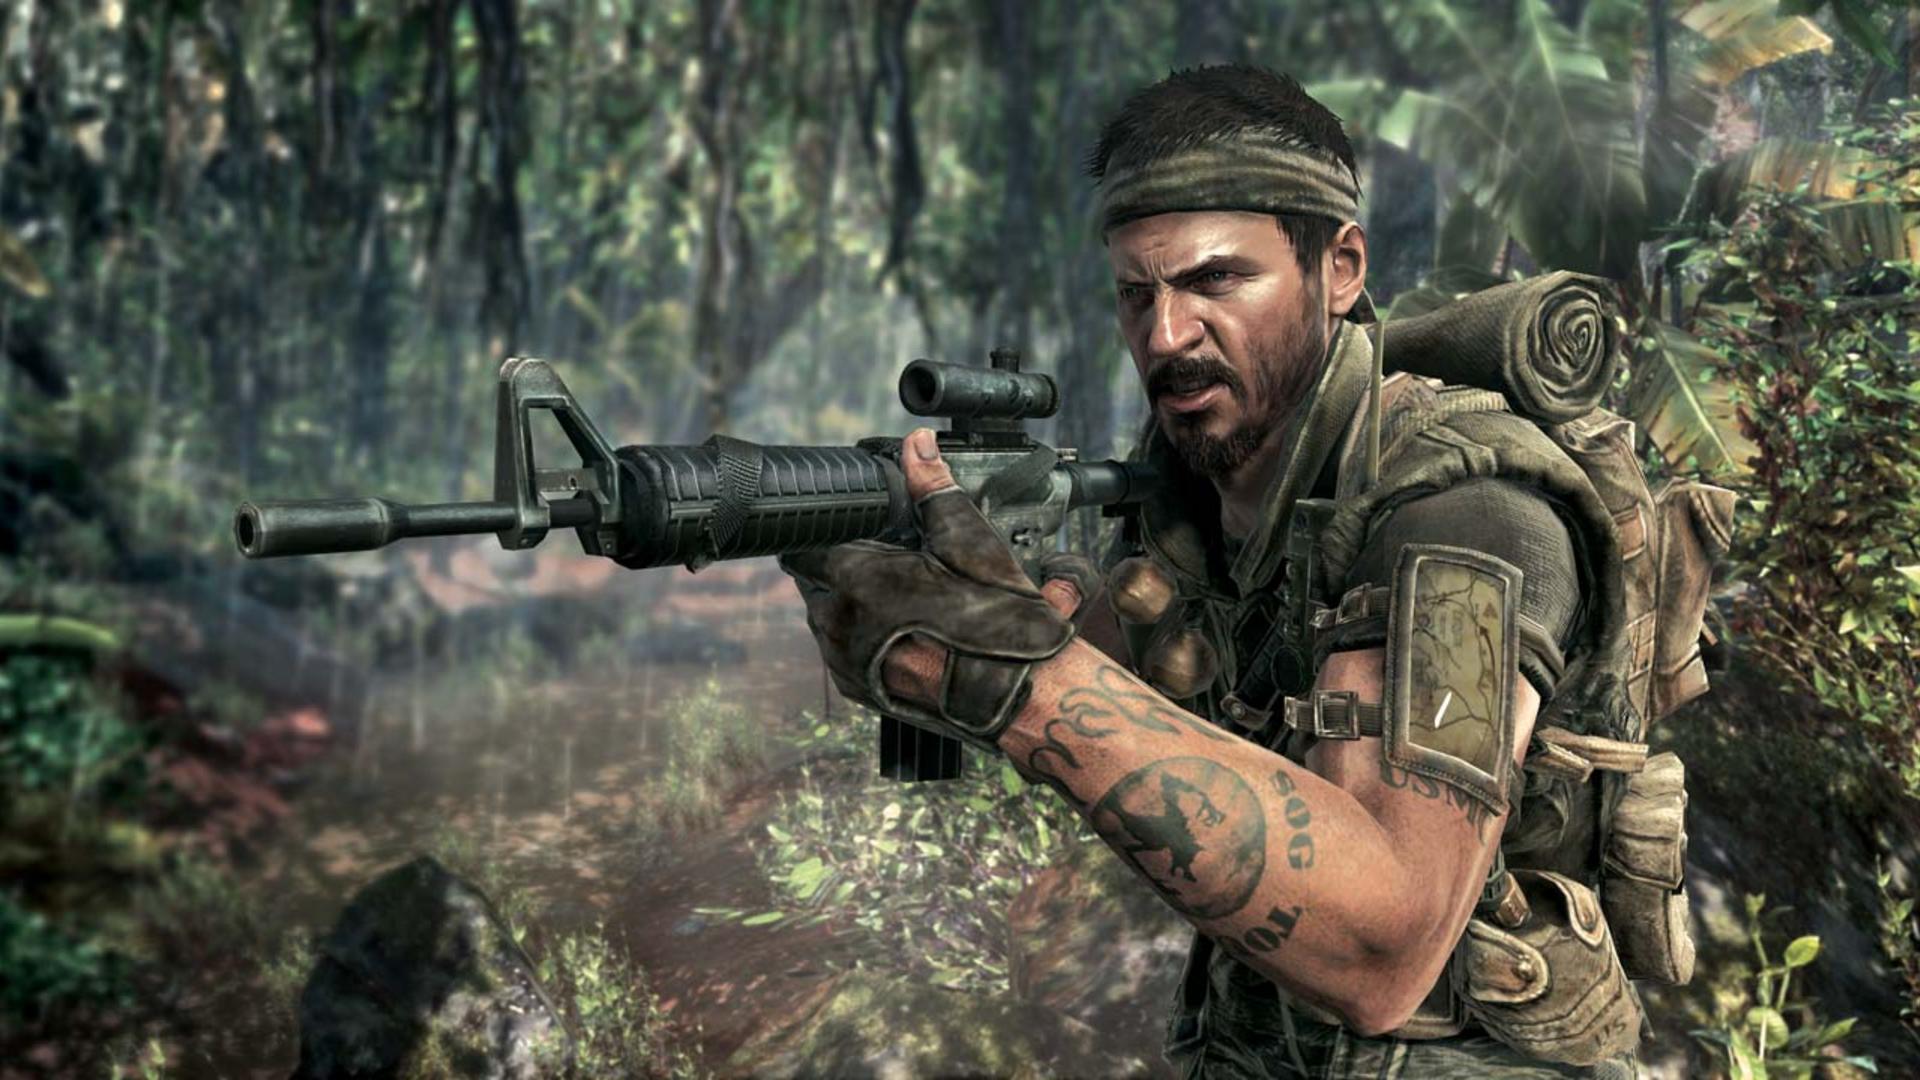 Call of Duty: Black Ops Cold War leaks reveal Woods coming to Warzone